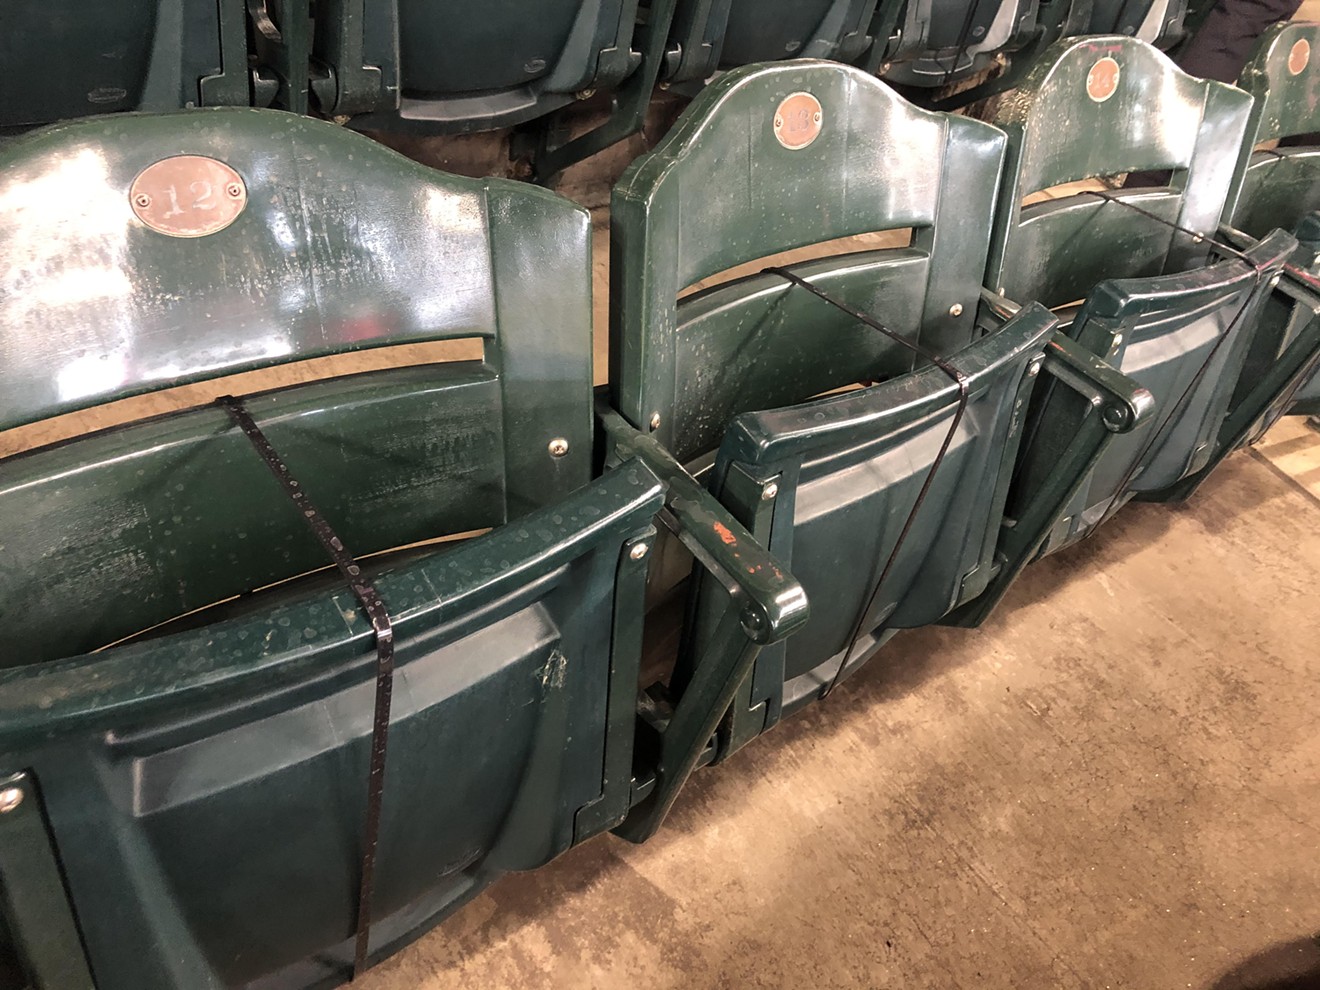 This season, many seats at Chase Field will be zip-tied to maintain social distancing.